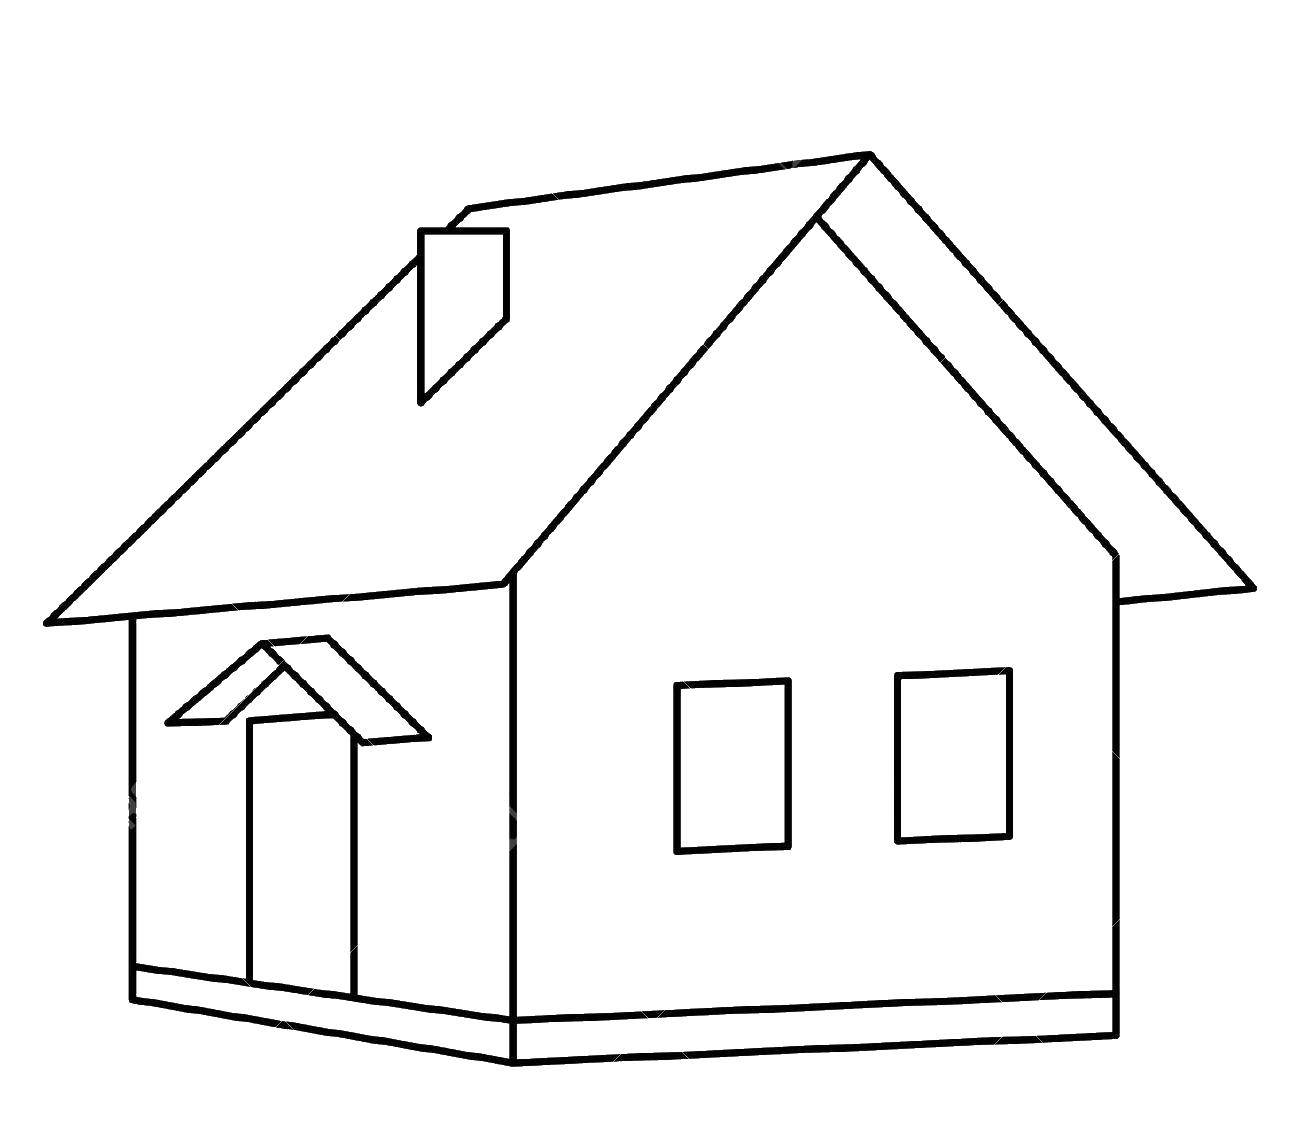 Coloring A simple house. Category The outline of the house. Tags:  House, building.